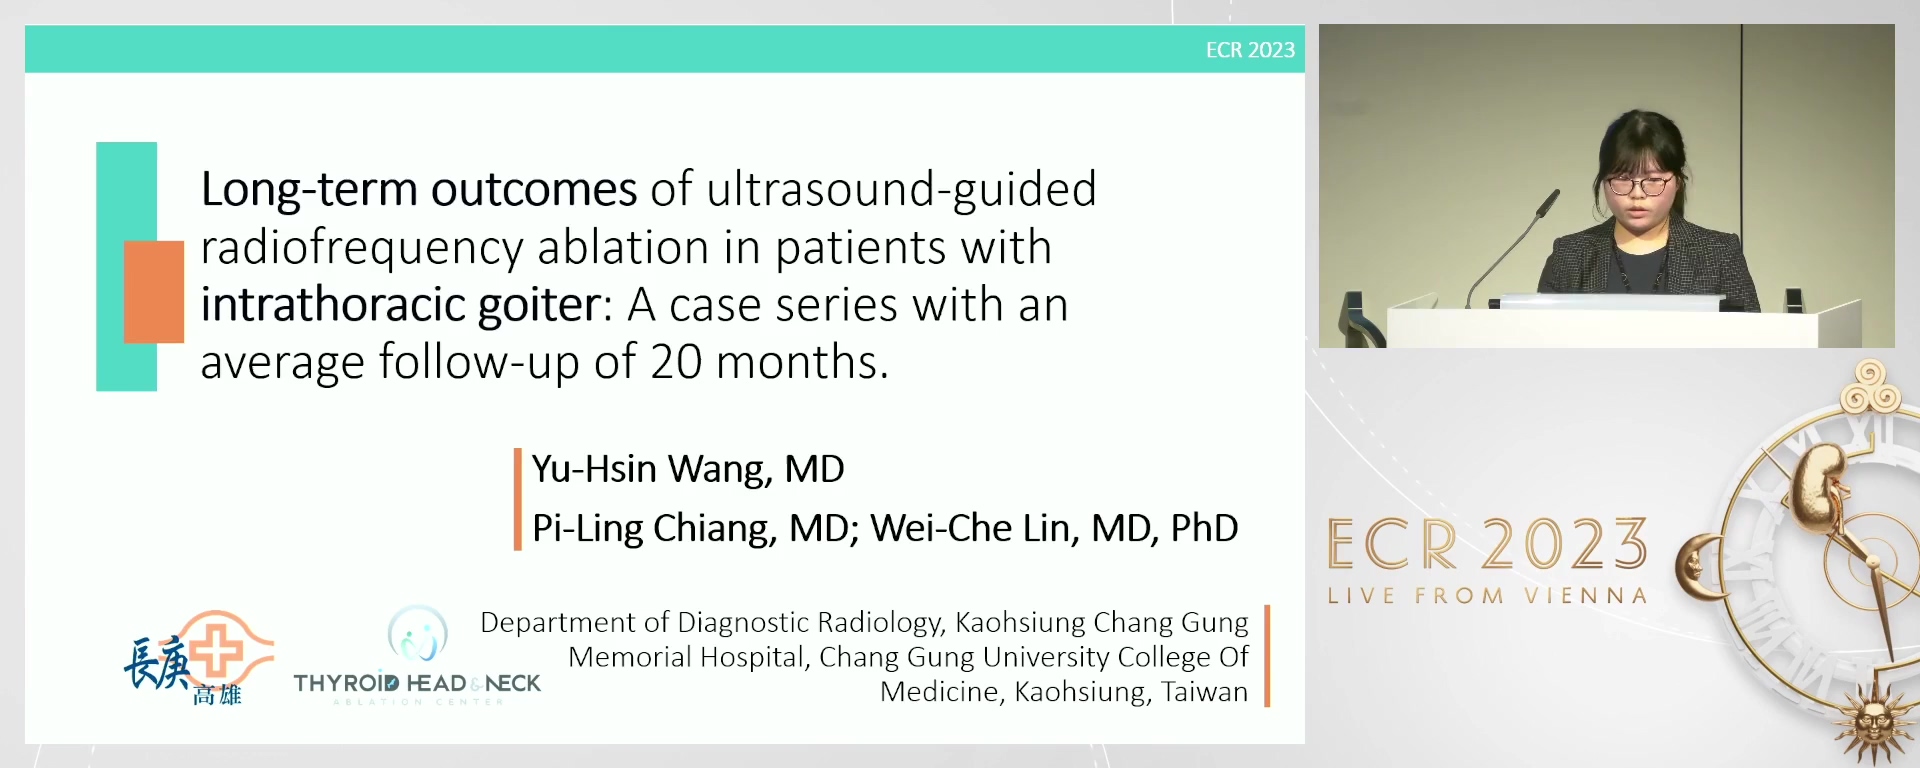 Long-term outcomes of ultrasound-guided radiofrequency ablation in patients with intrathoracic goiter: a case series with an average follow-up of 20 months. - Yu-Hsin  Wang, Kaohsiung City / TW